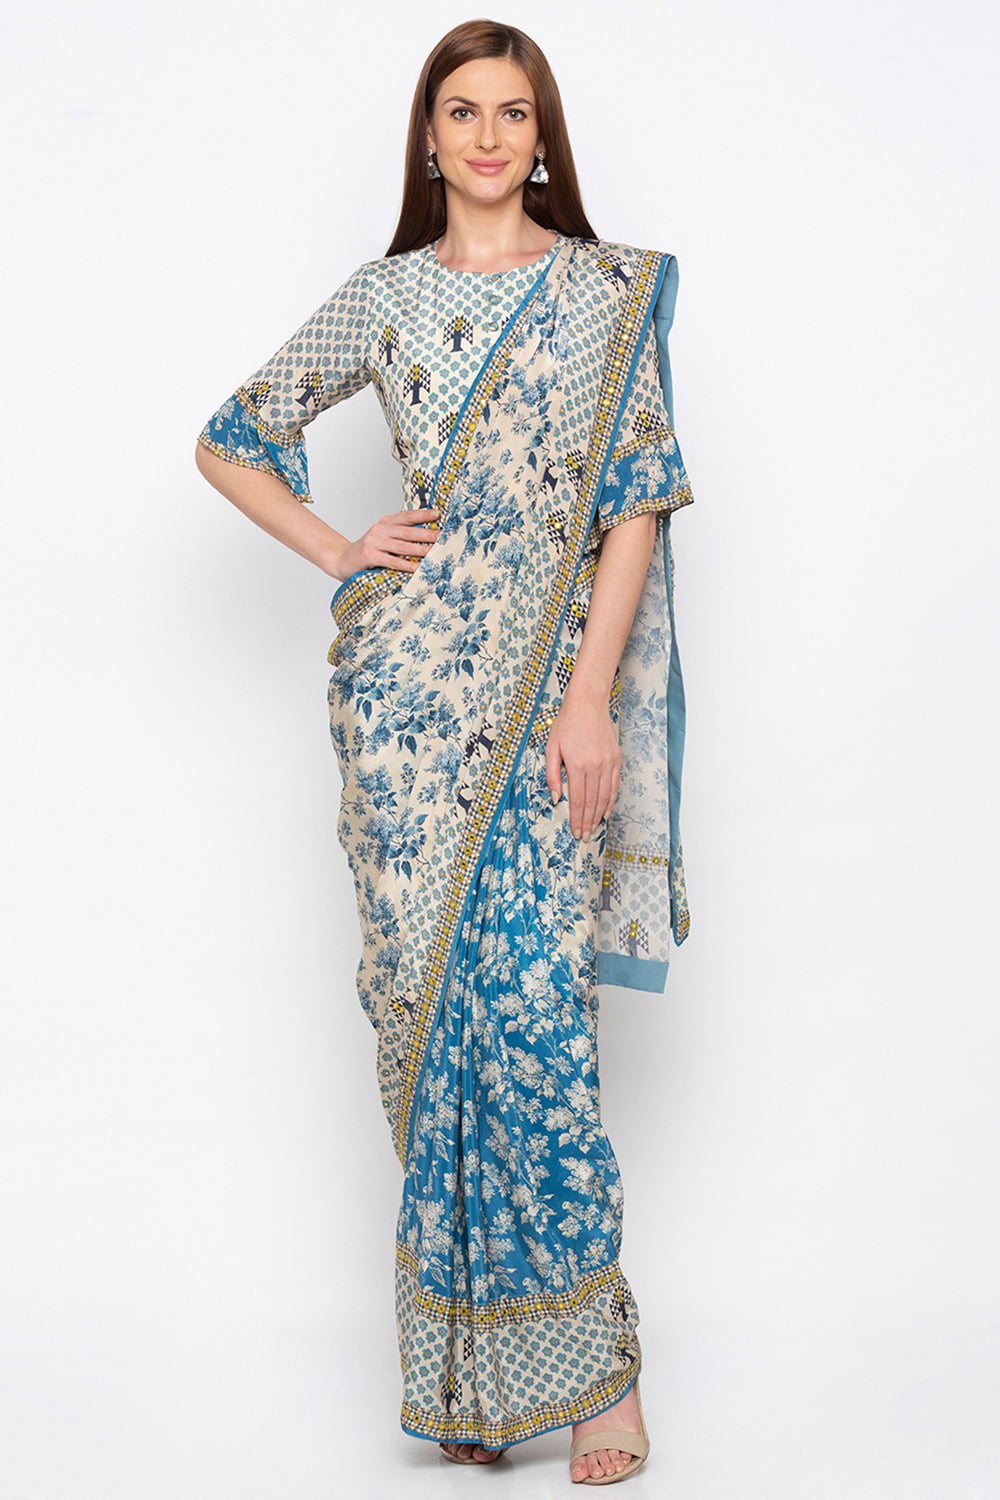 Applique Printed Pre-Stitched Saree With Blouse